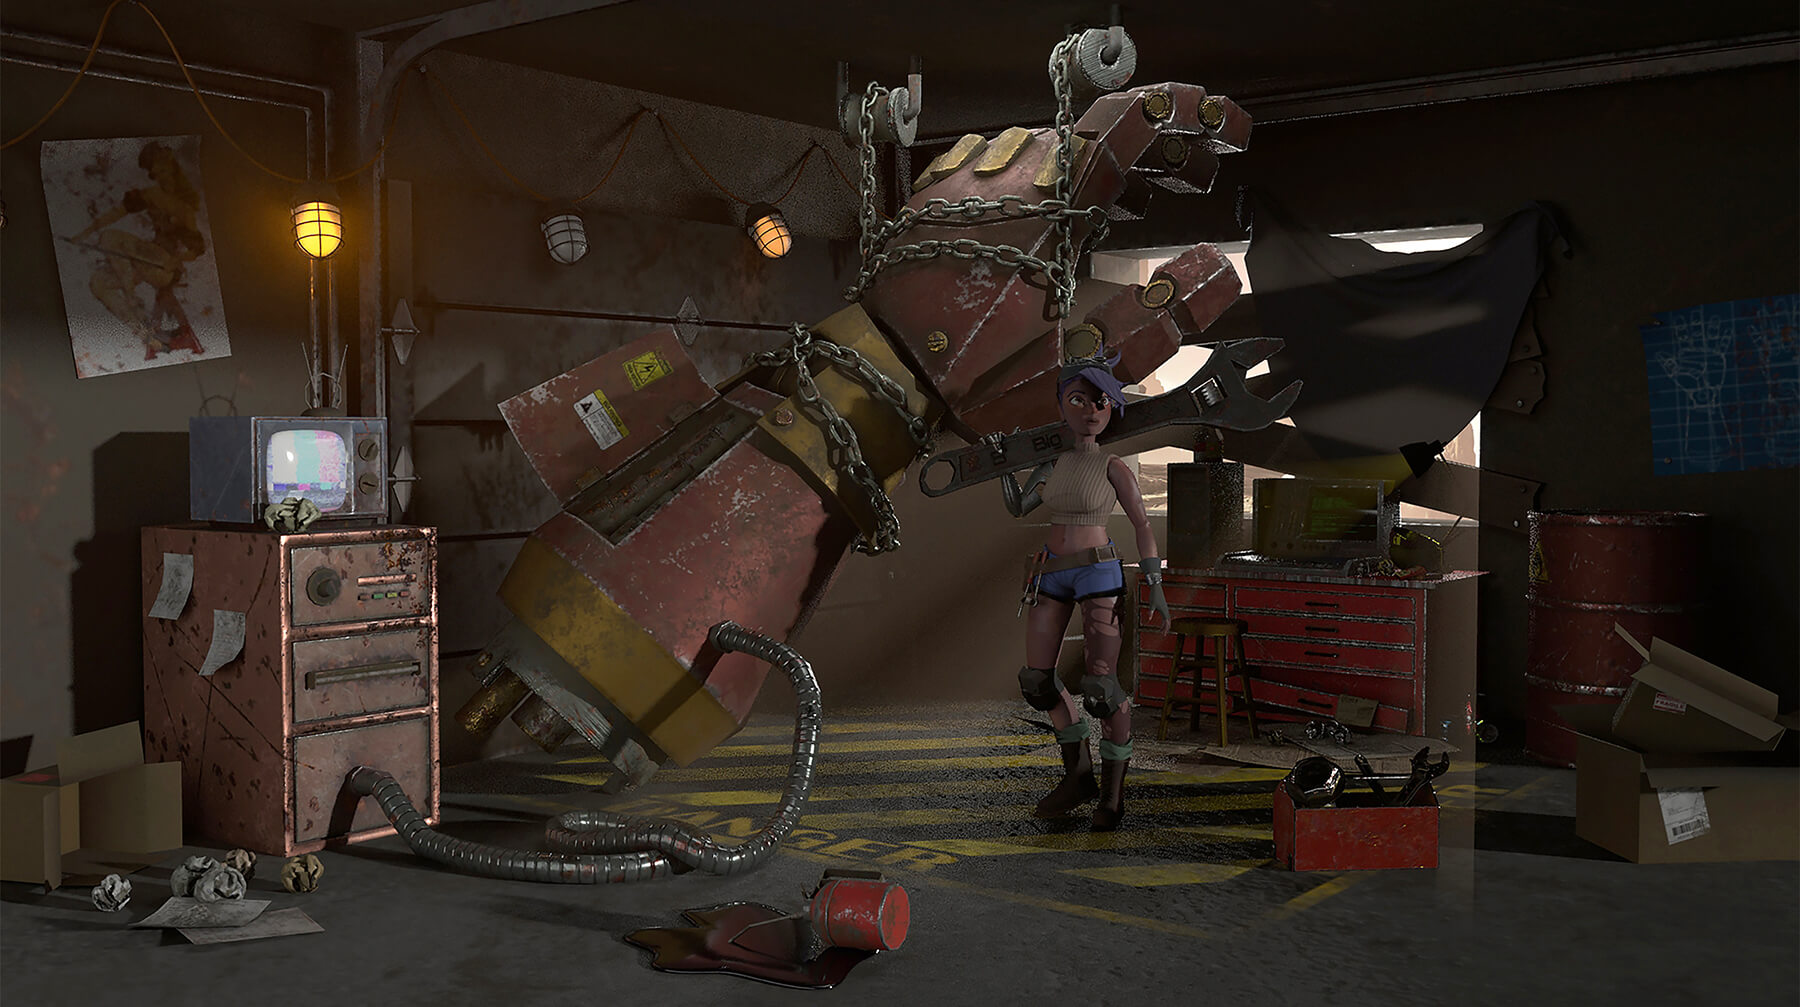 3D model of a woman mechanic holding a giant wrench, standing in a garage next to a giant robot arm.